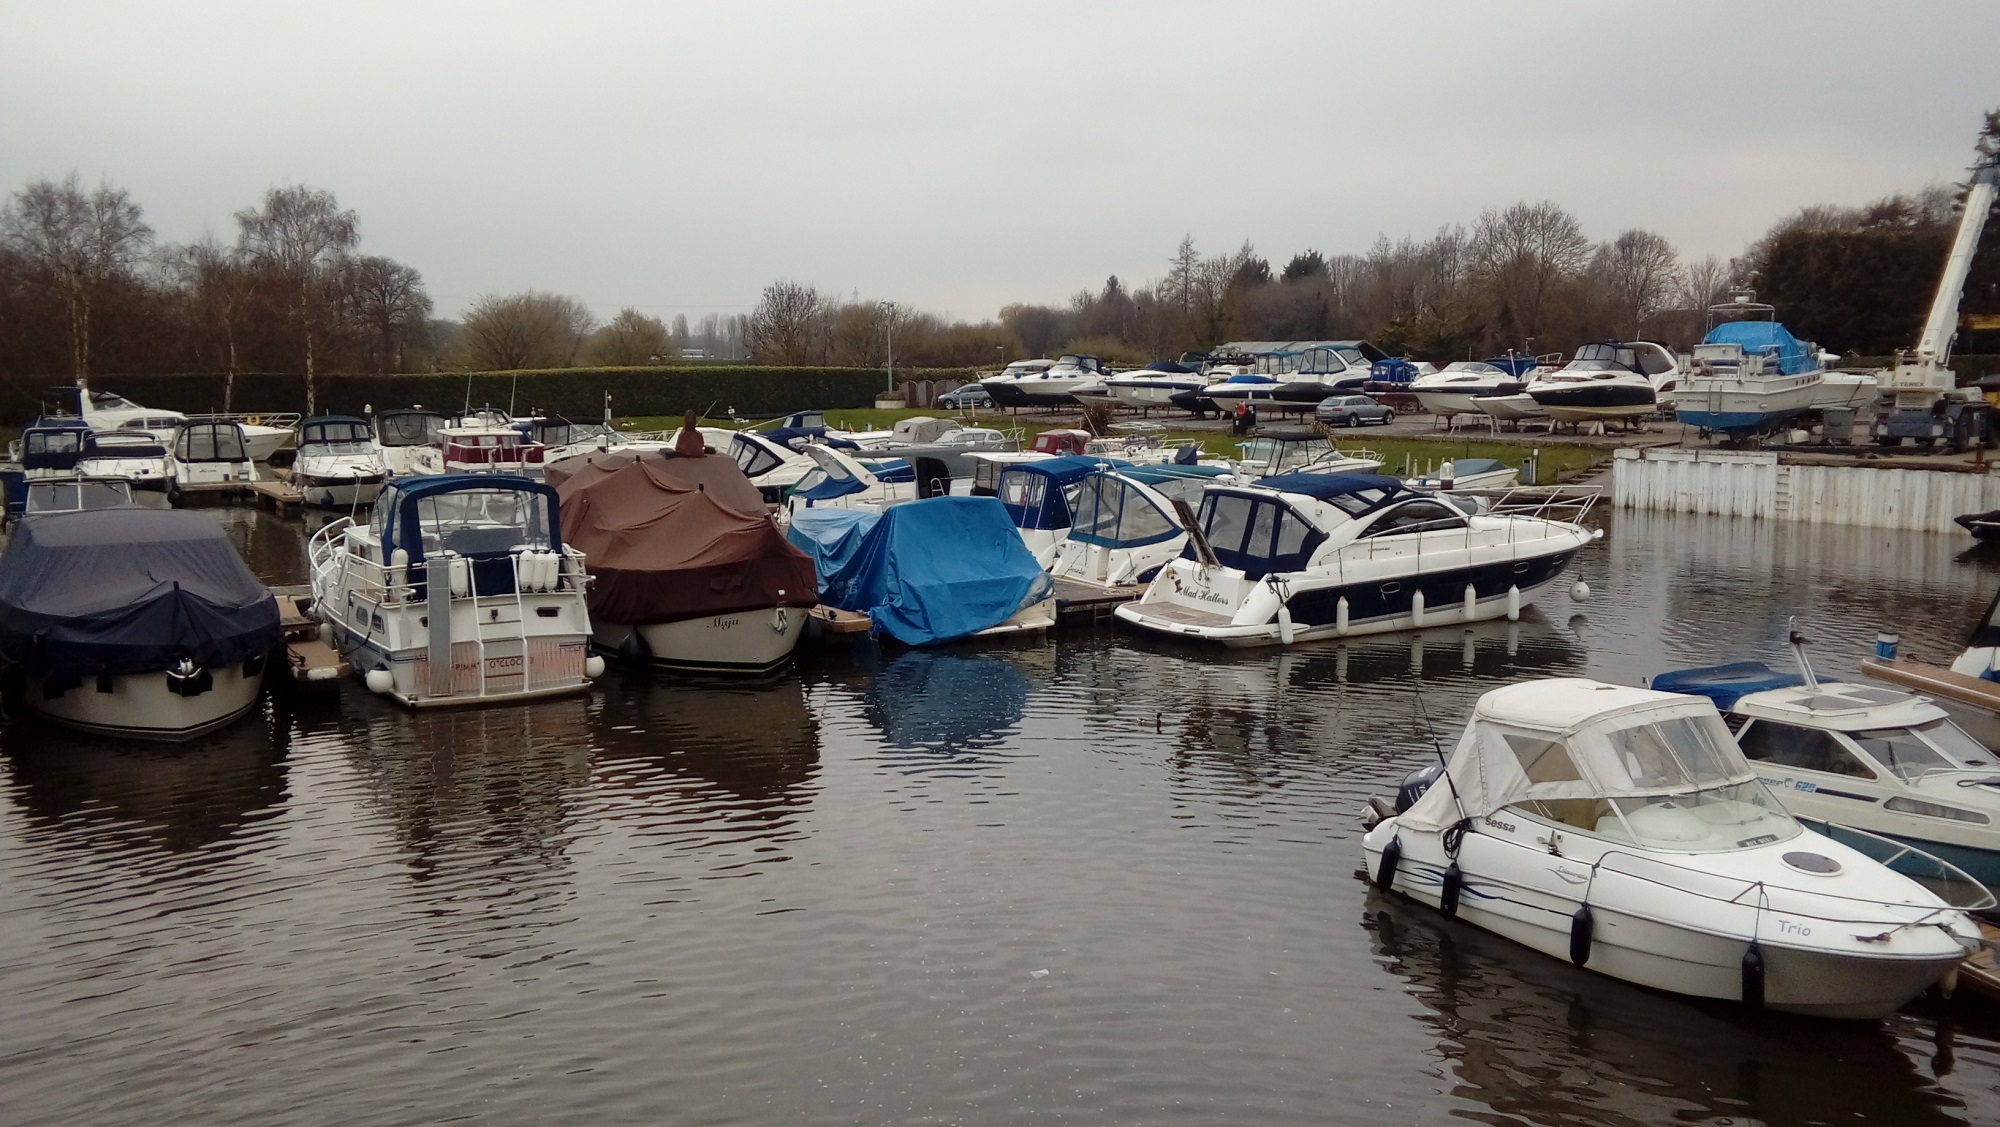 Boats moored within a marina during colder weather on a cloudy day.